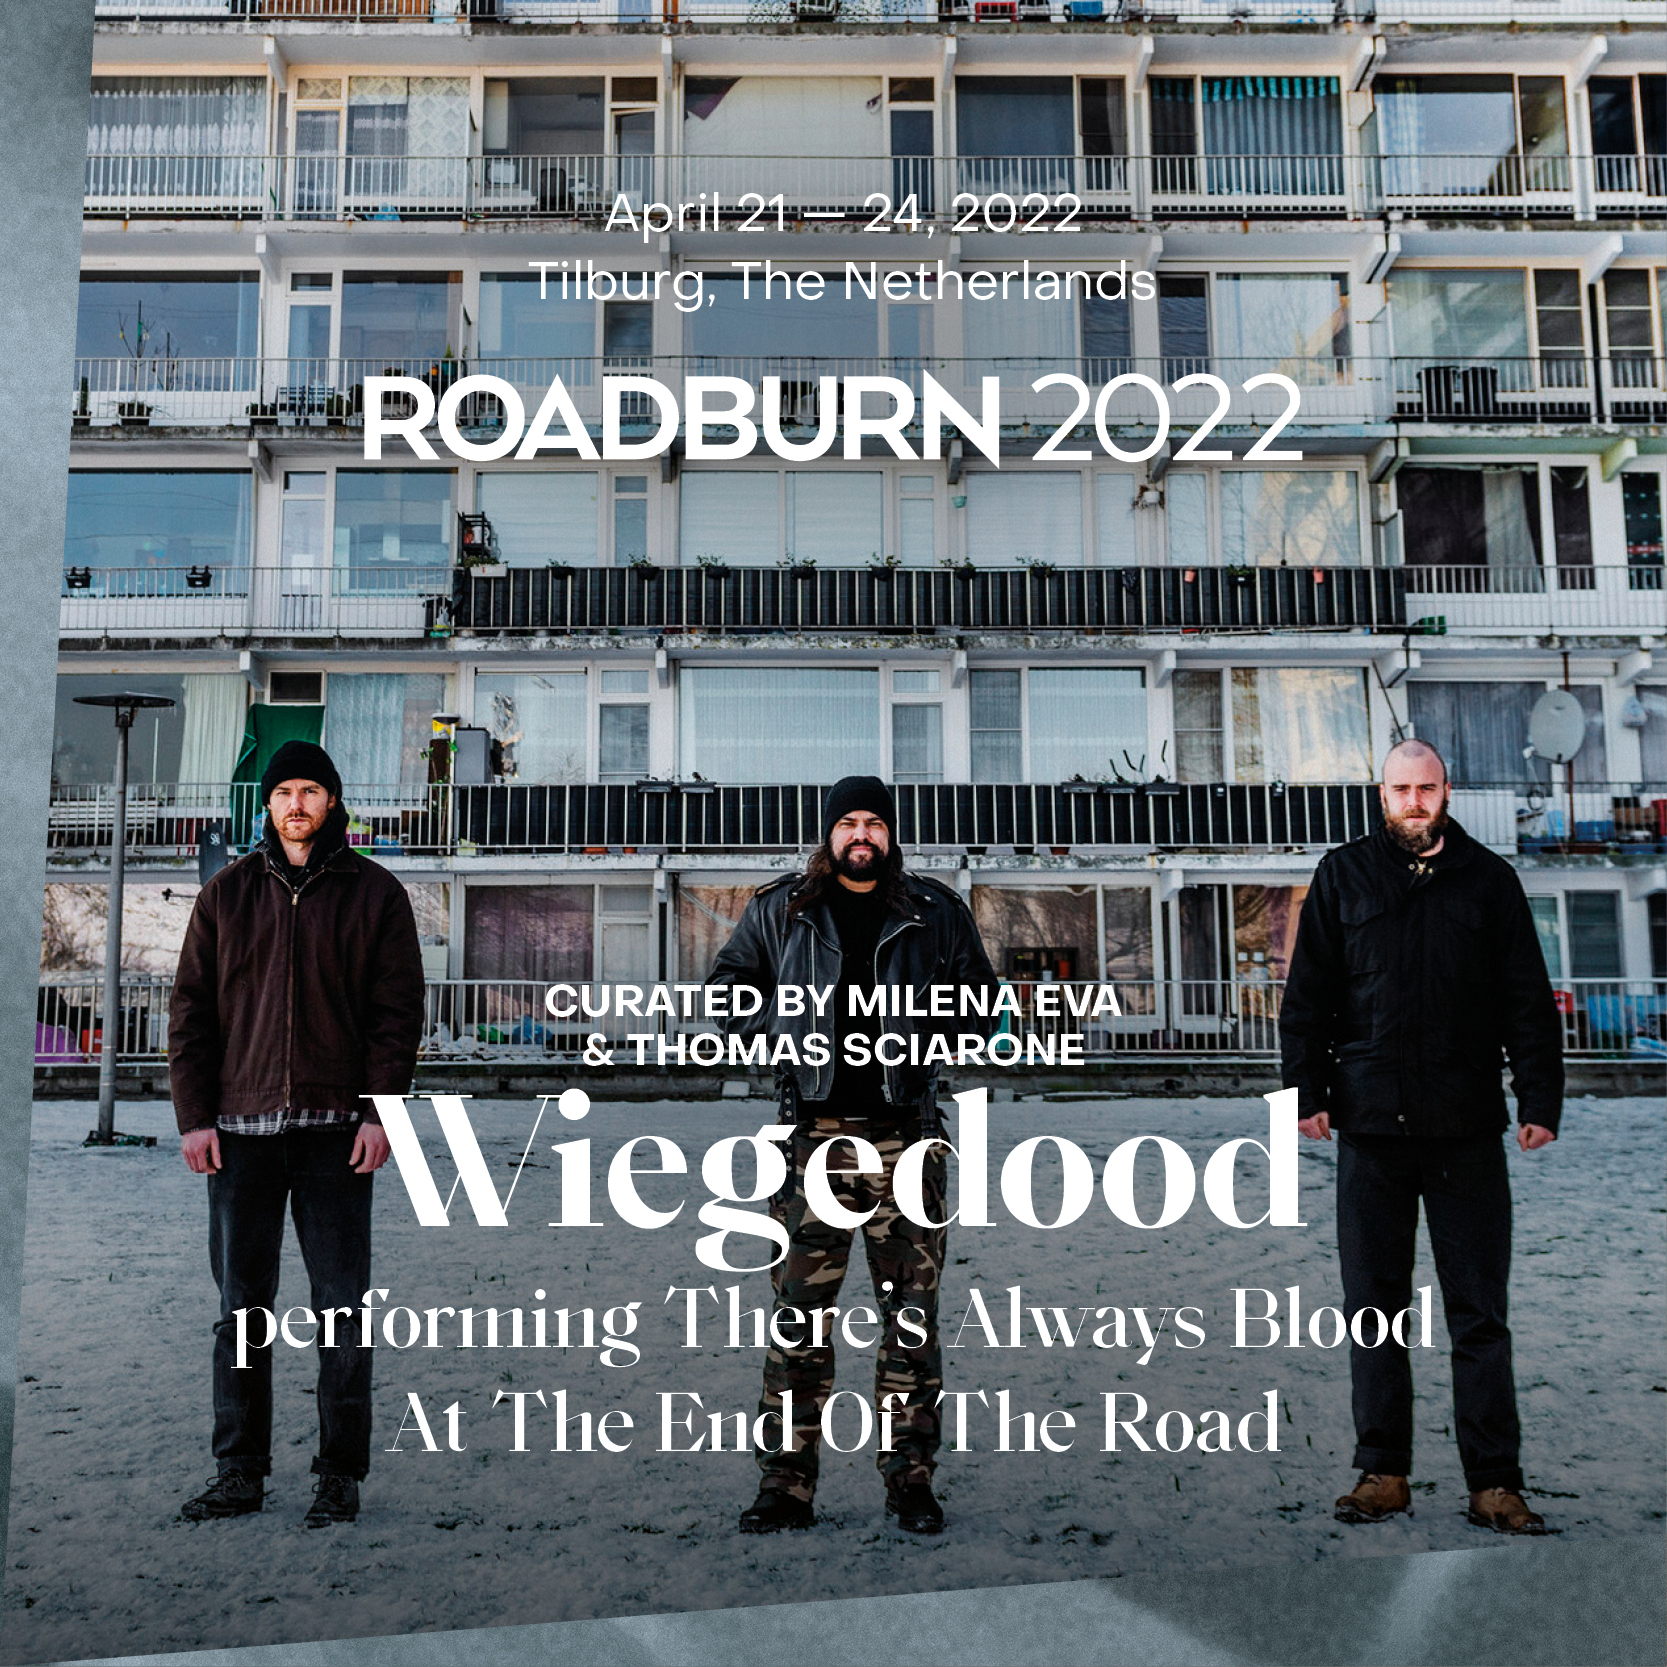 Wiegedood - There's Always Blood At The End Of The Road (2022) Black metal perfecto... De gira! RB2022_artwork_bands-vierkant-drop-7_4-1